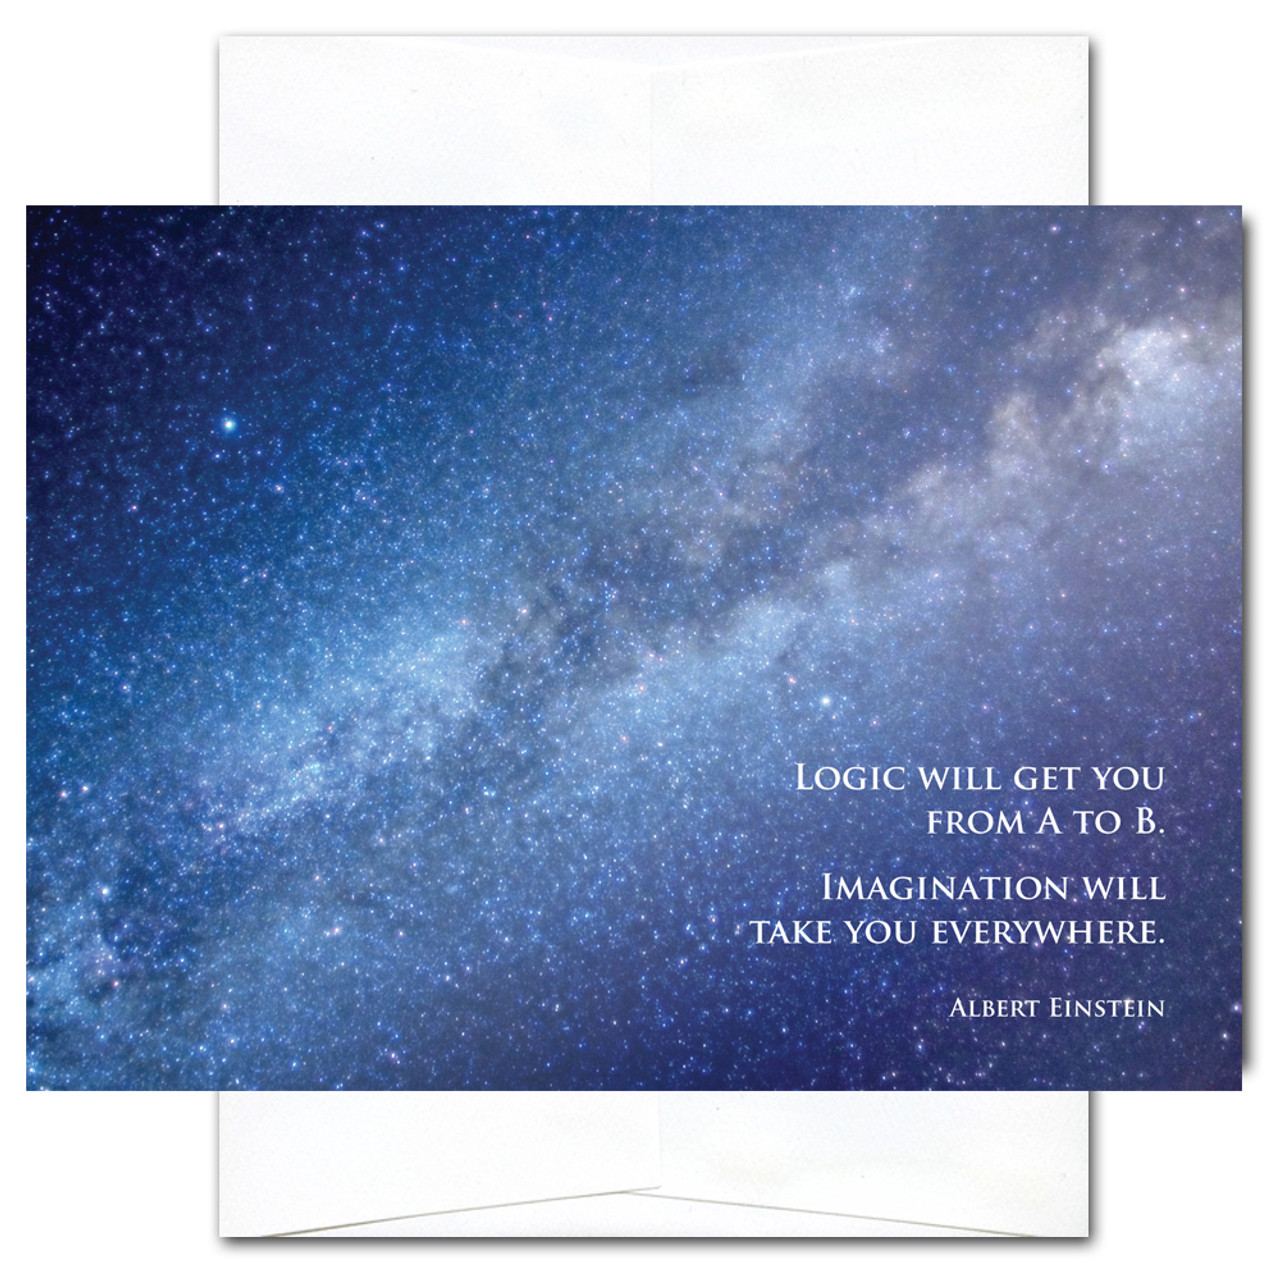 Einstein Quotation Card has a photo of the Milky Way galaxy and the Albert Einstein quote, "Logic will get you from A to B. Imagination will take you everywhere. "